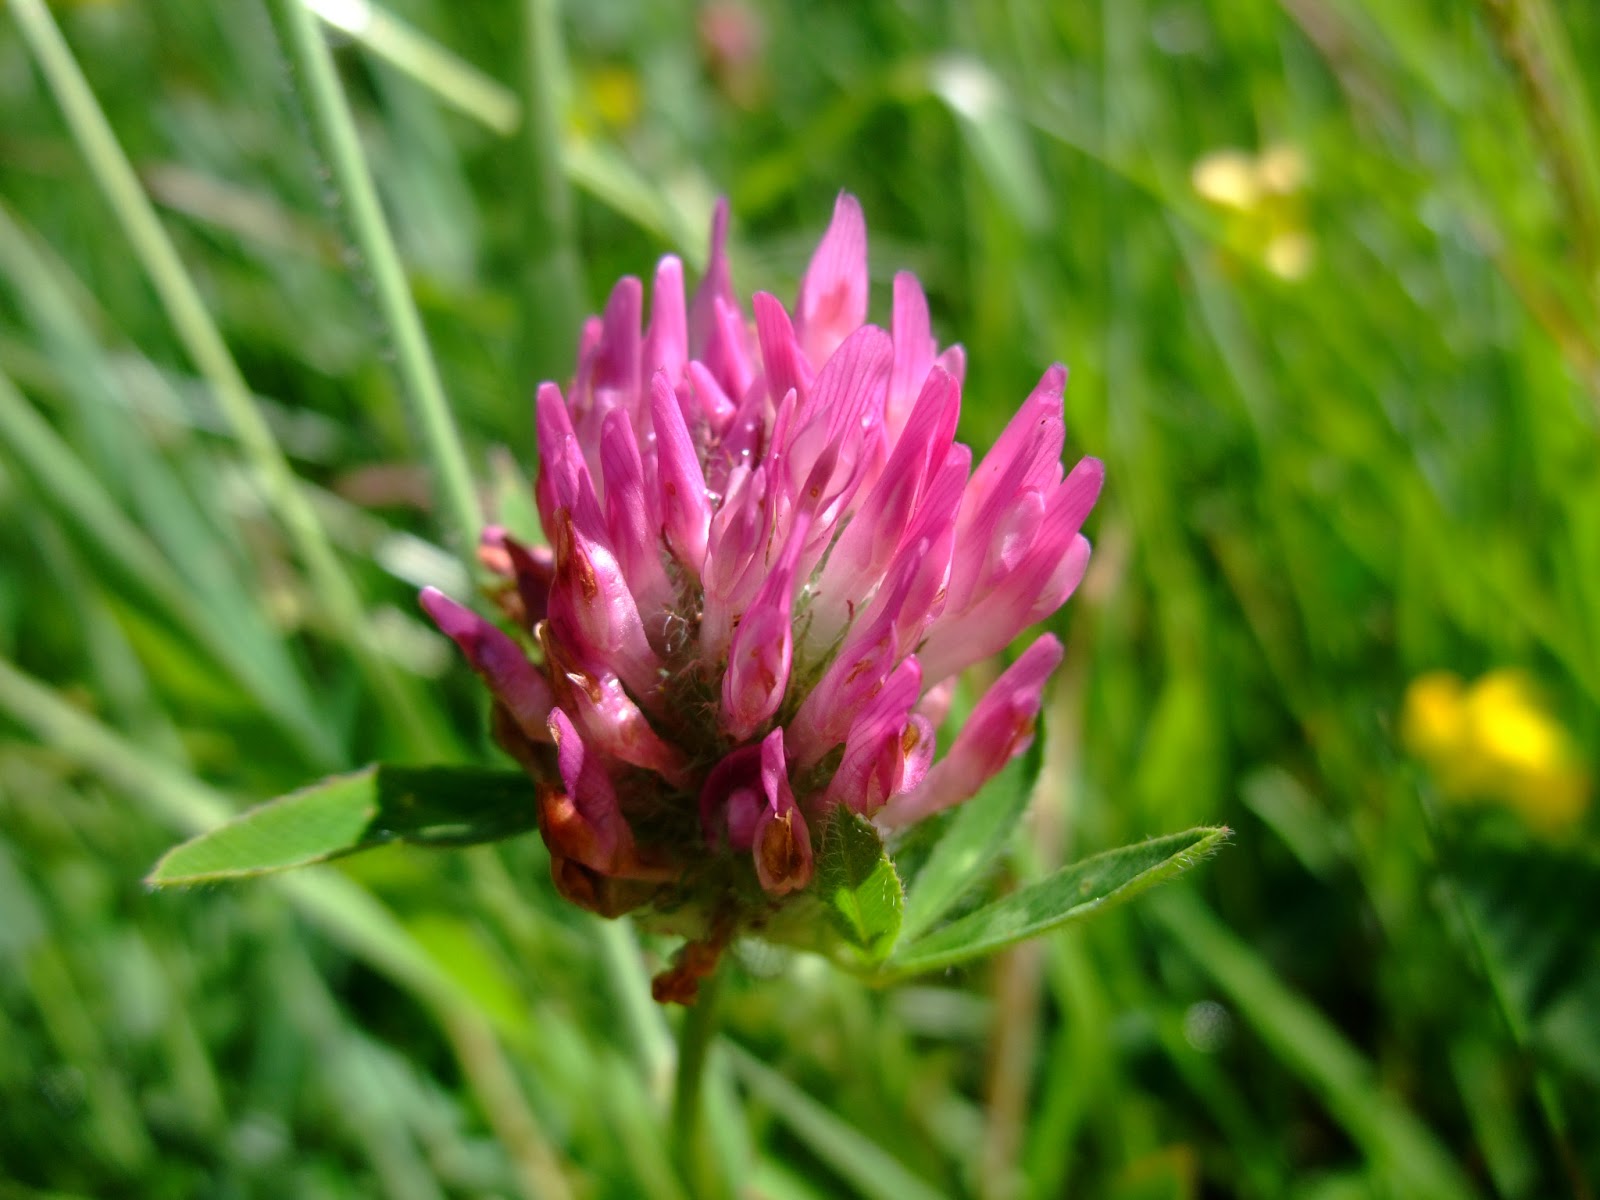 HERBAL PICNIC: RED CLOVER